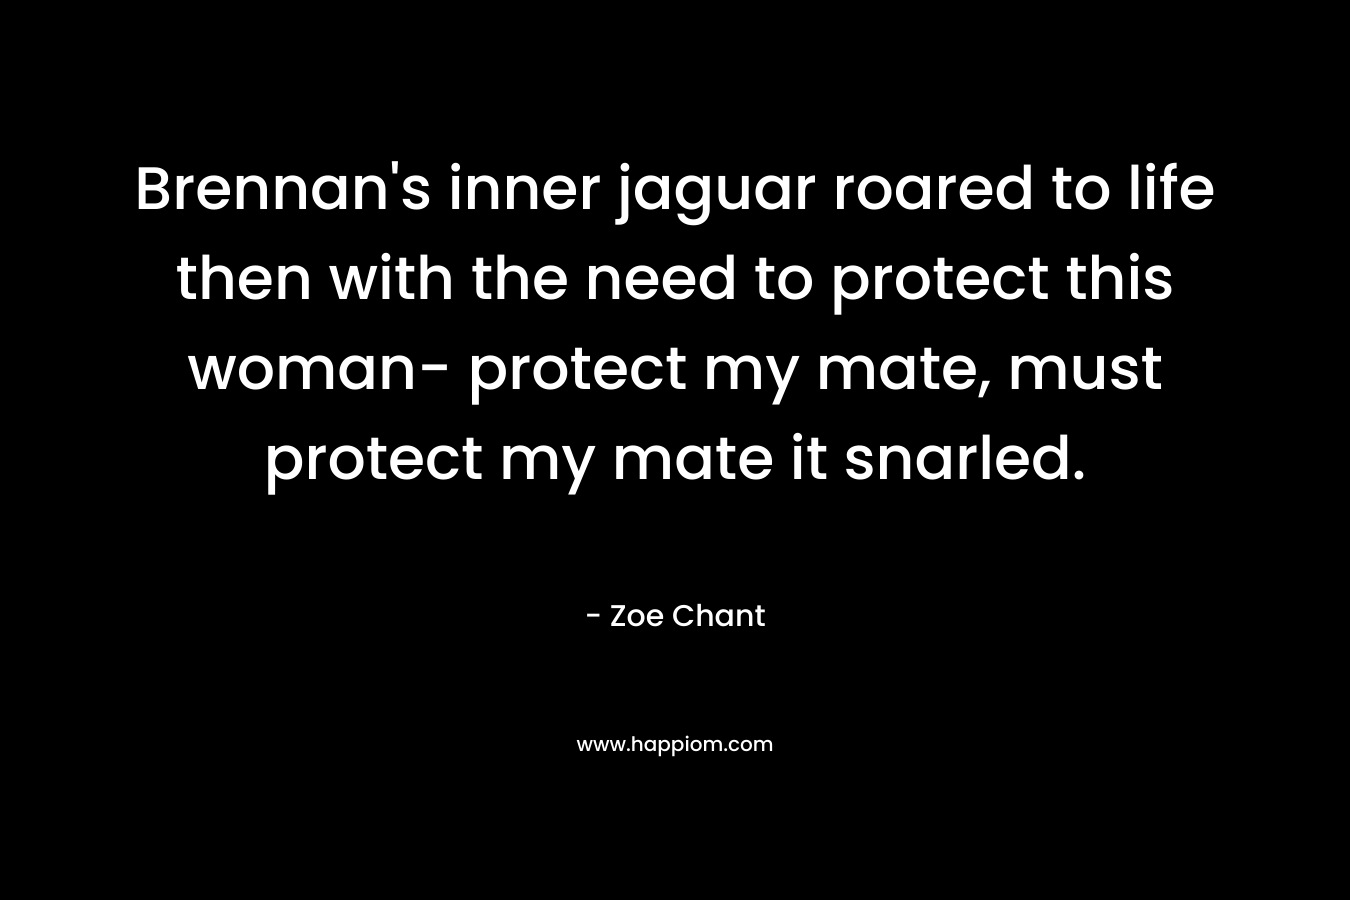 Brennan’s inner jaguar roared to life then with the need to protect this woman- protect my mate, must protect my mate it snarled. – Zoe Chant